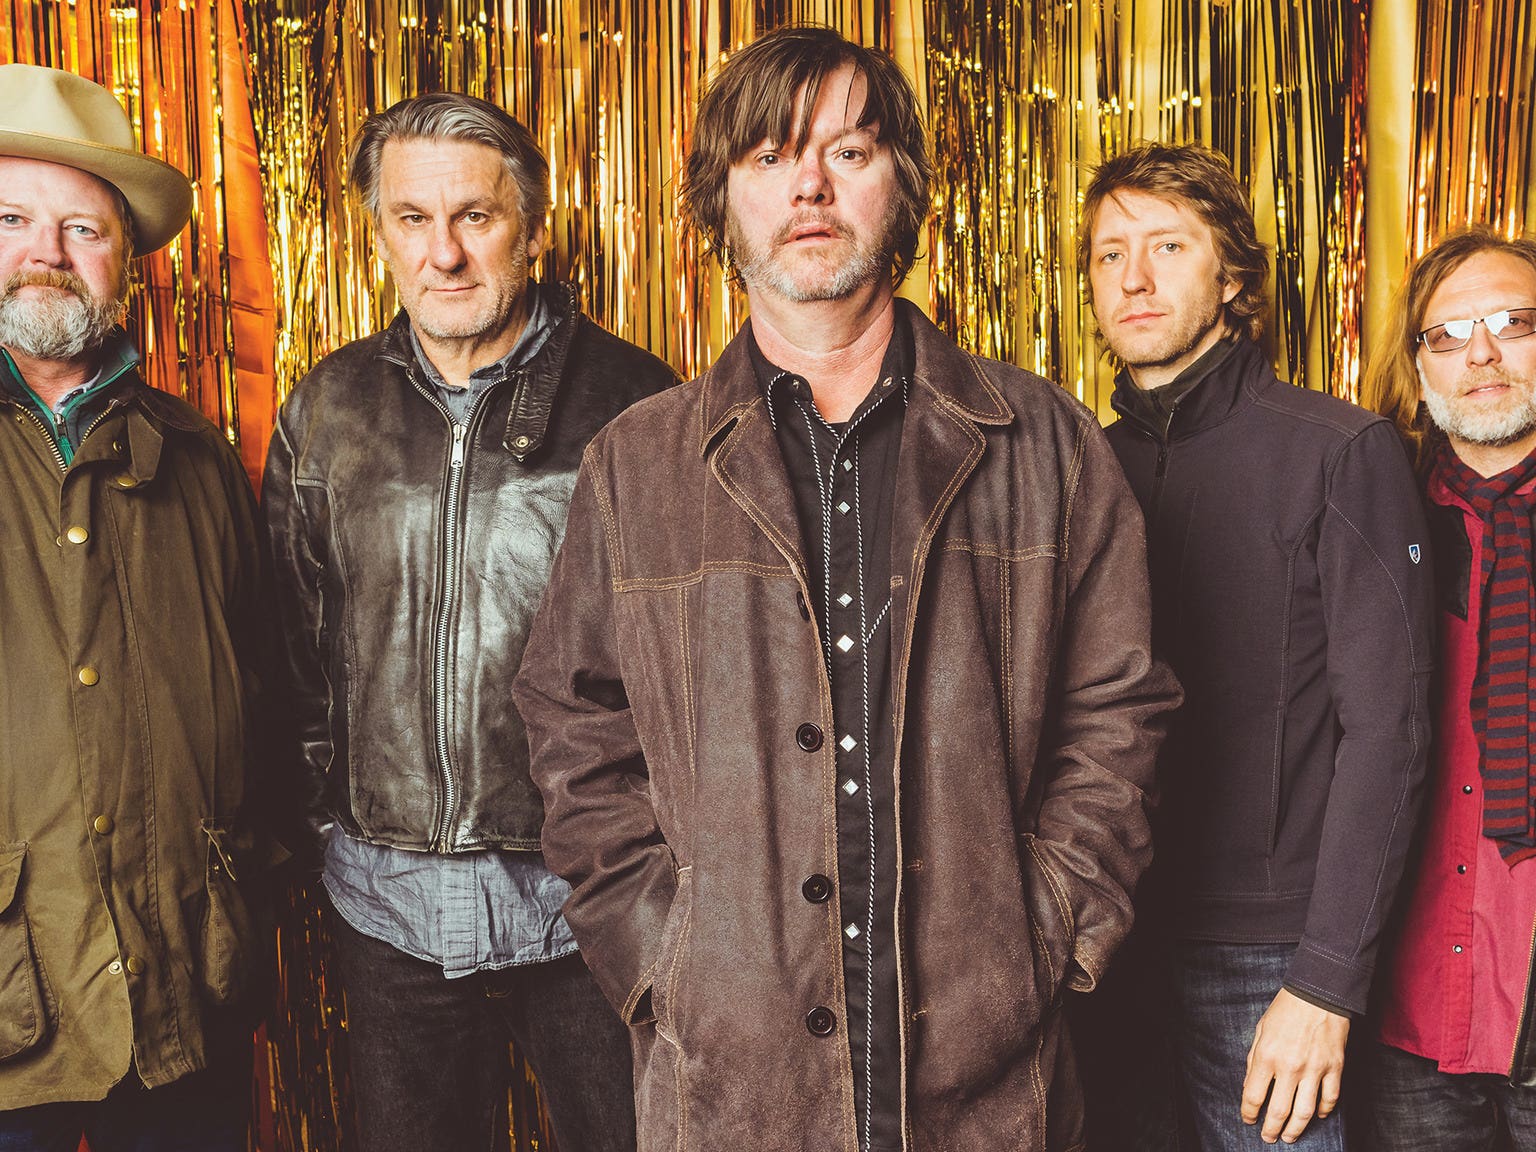 Main image for event titled Son Volt